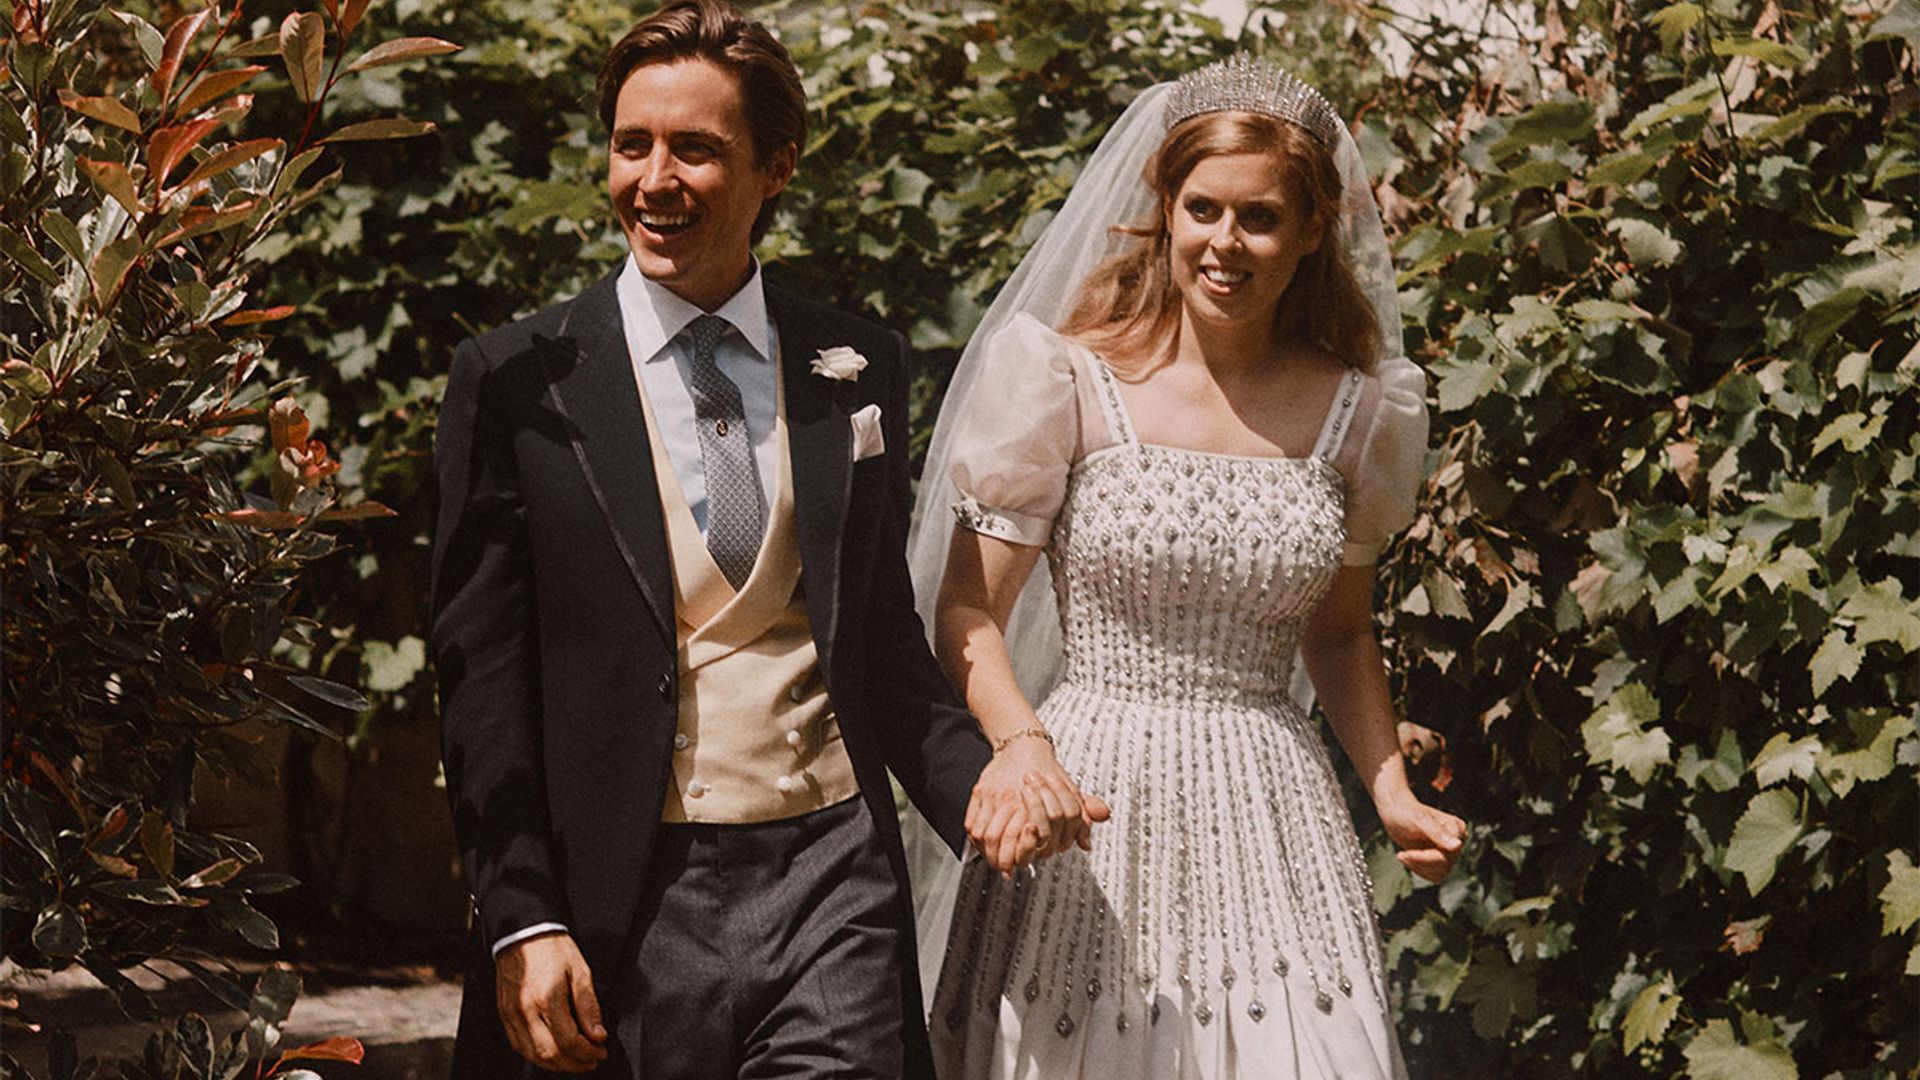 Princess Beatrice's wedding dress to go on display at Windsor Castle